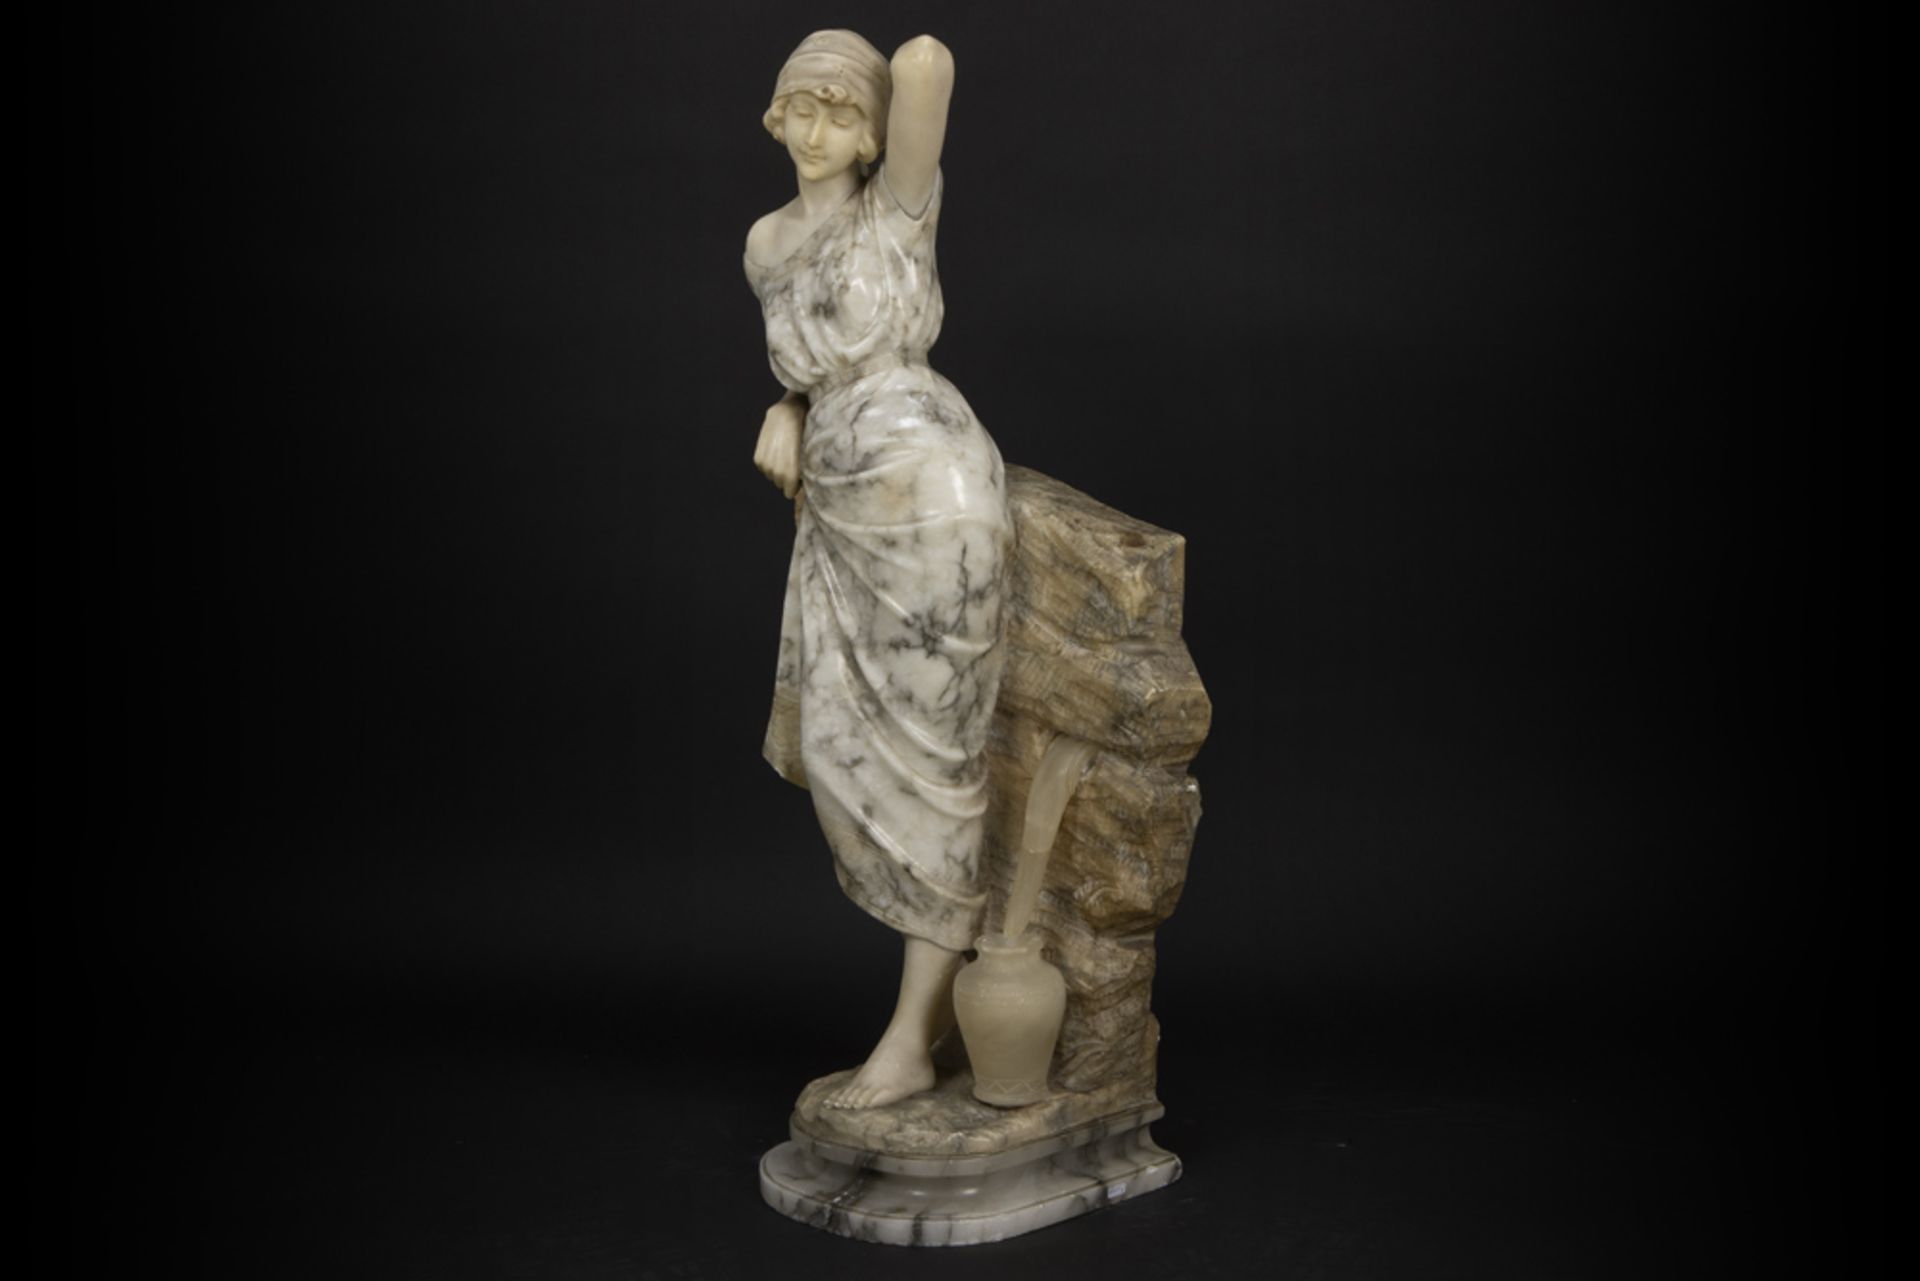 19th Cent. Italian sculpture in marble and alabaster - signed Trafely & Sardelli || TRAFELY & - Image 3 of 5